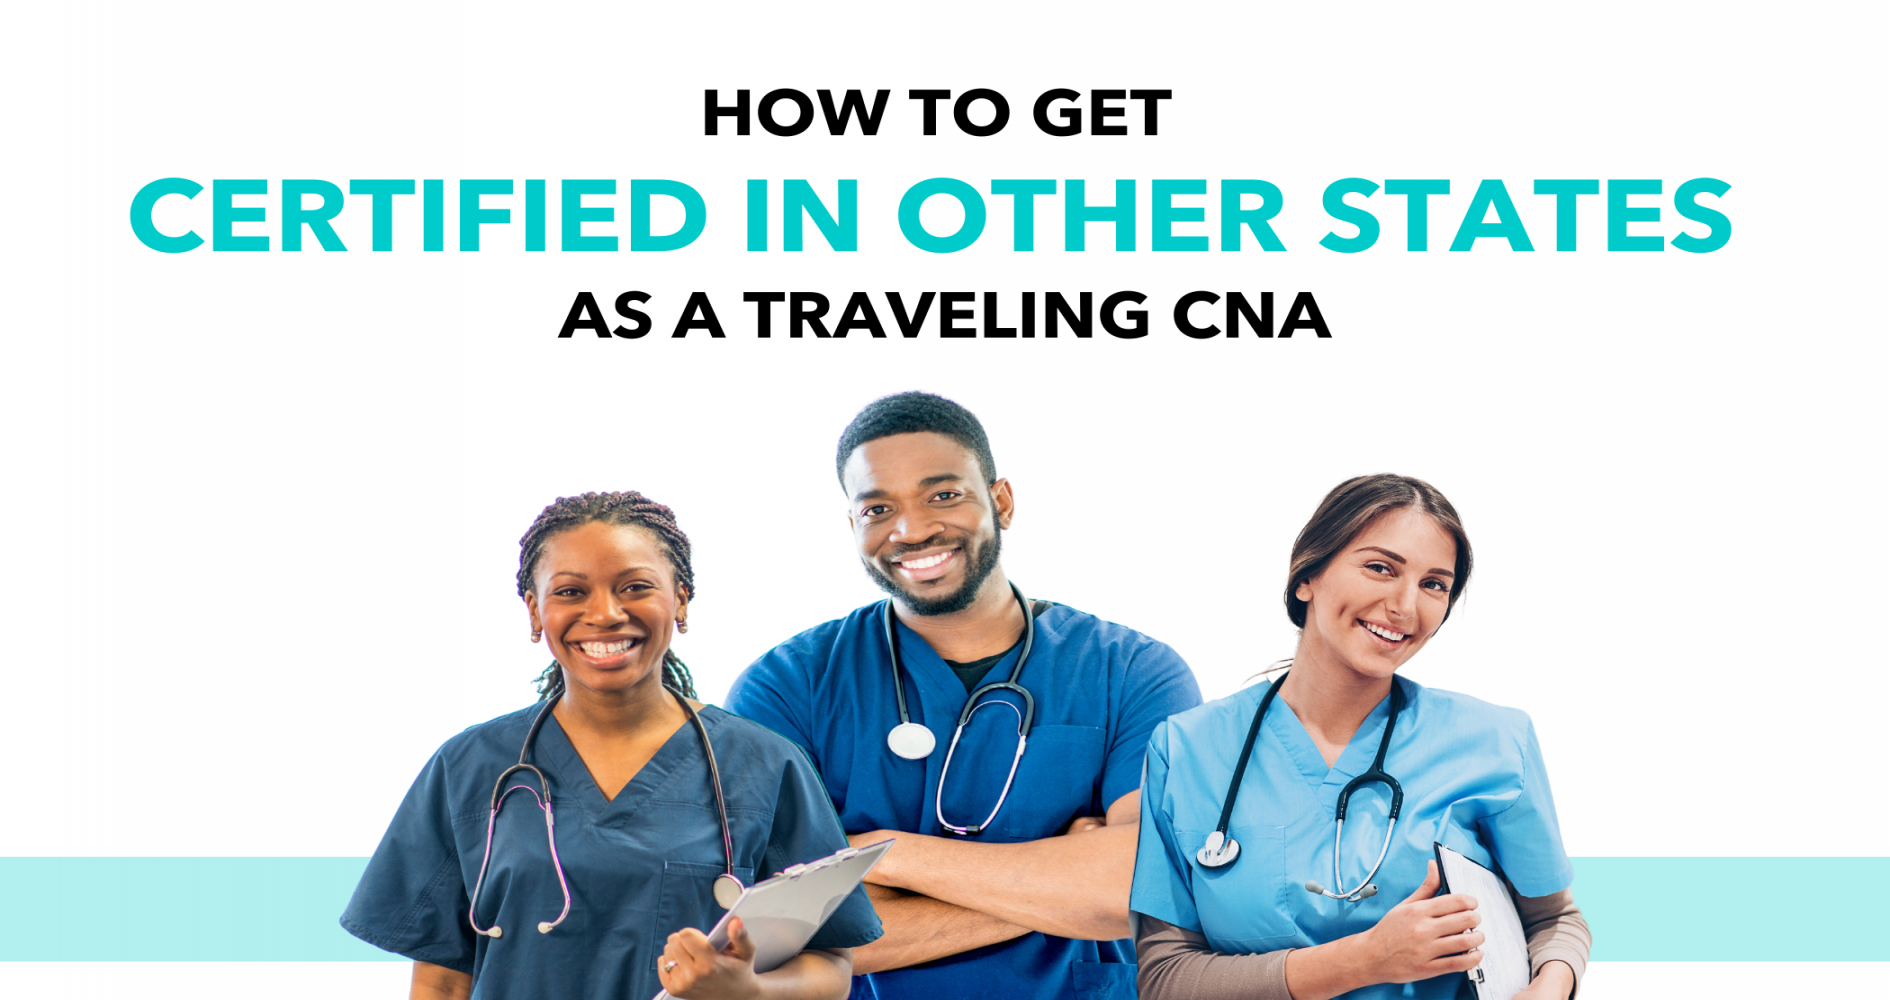 How to Get Certified in Other States as a Traveling CNA - Marvel